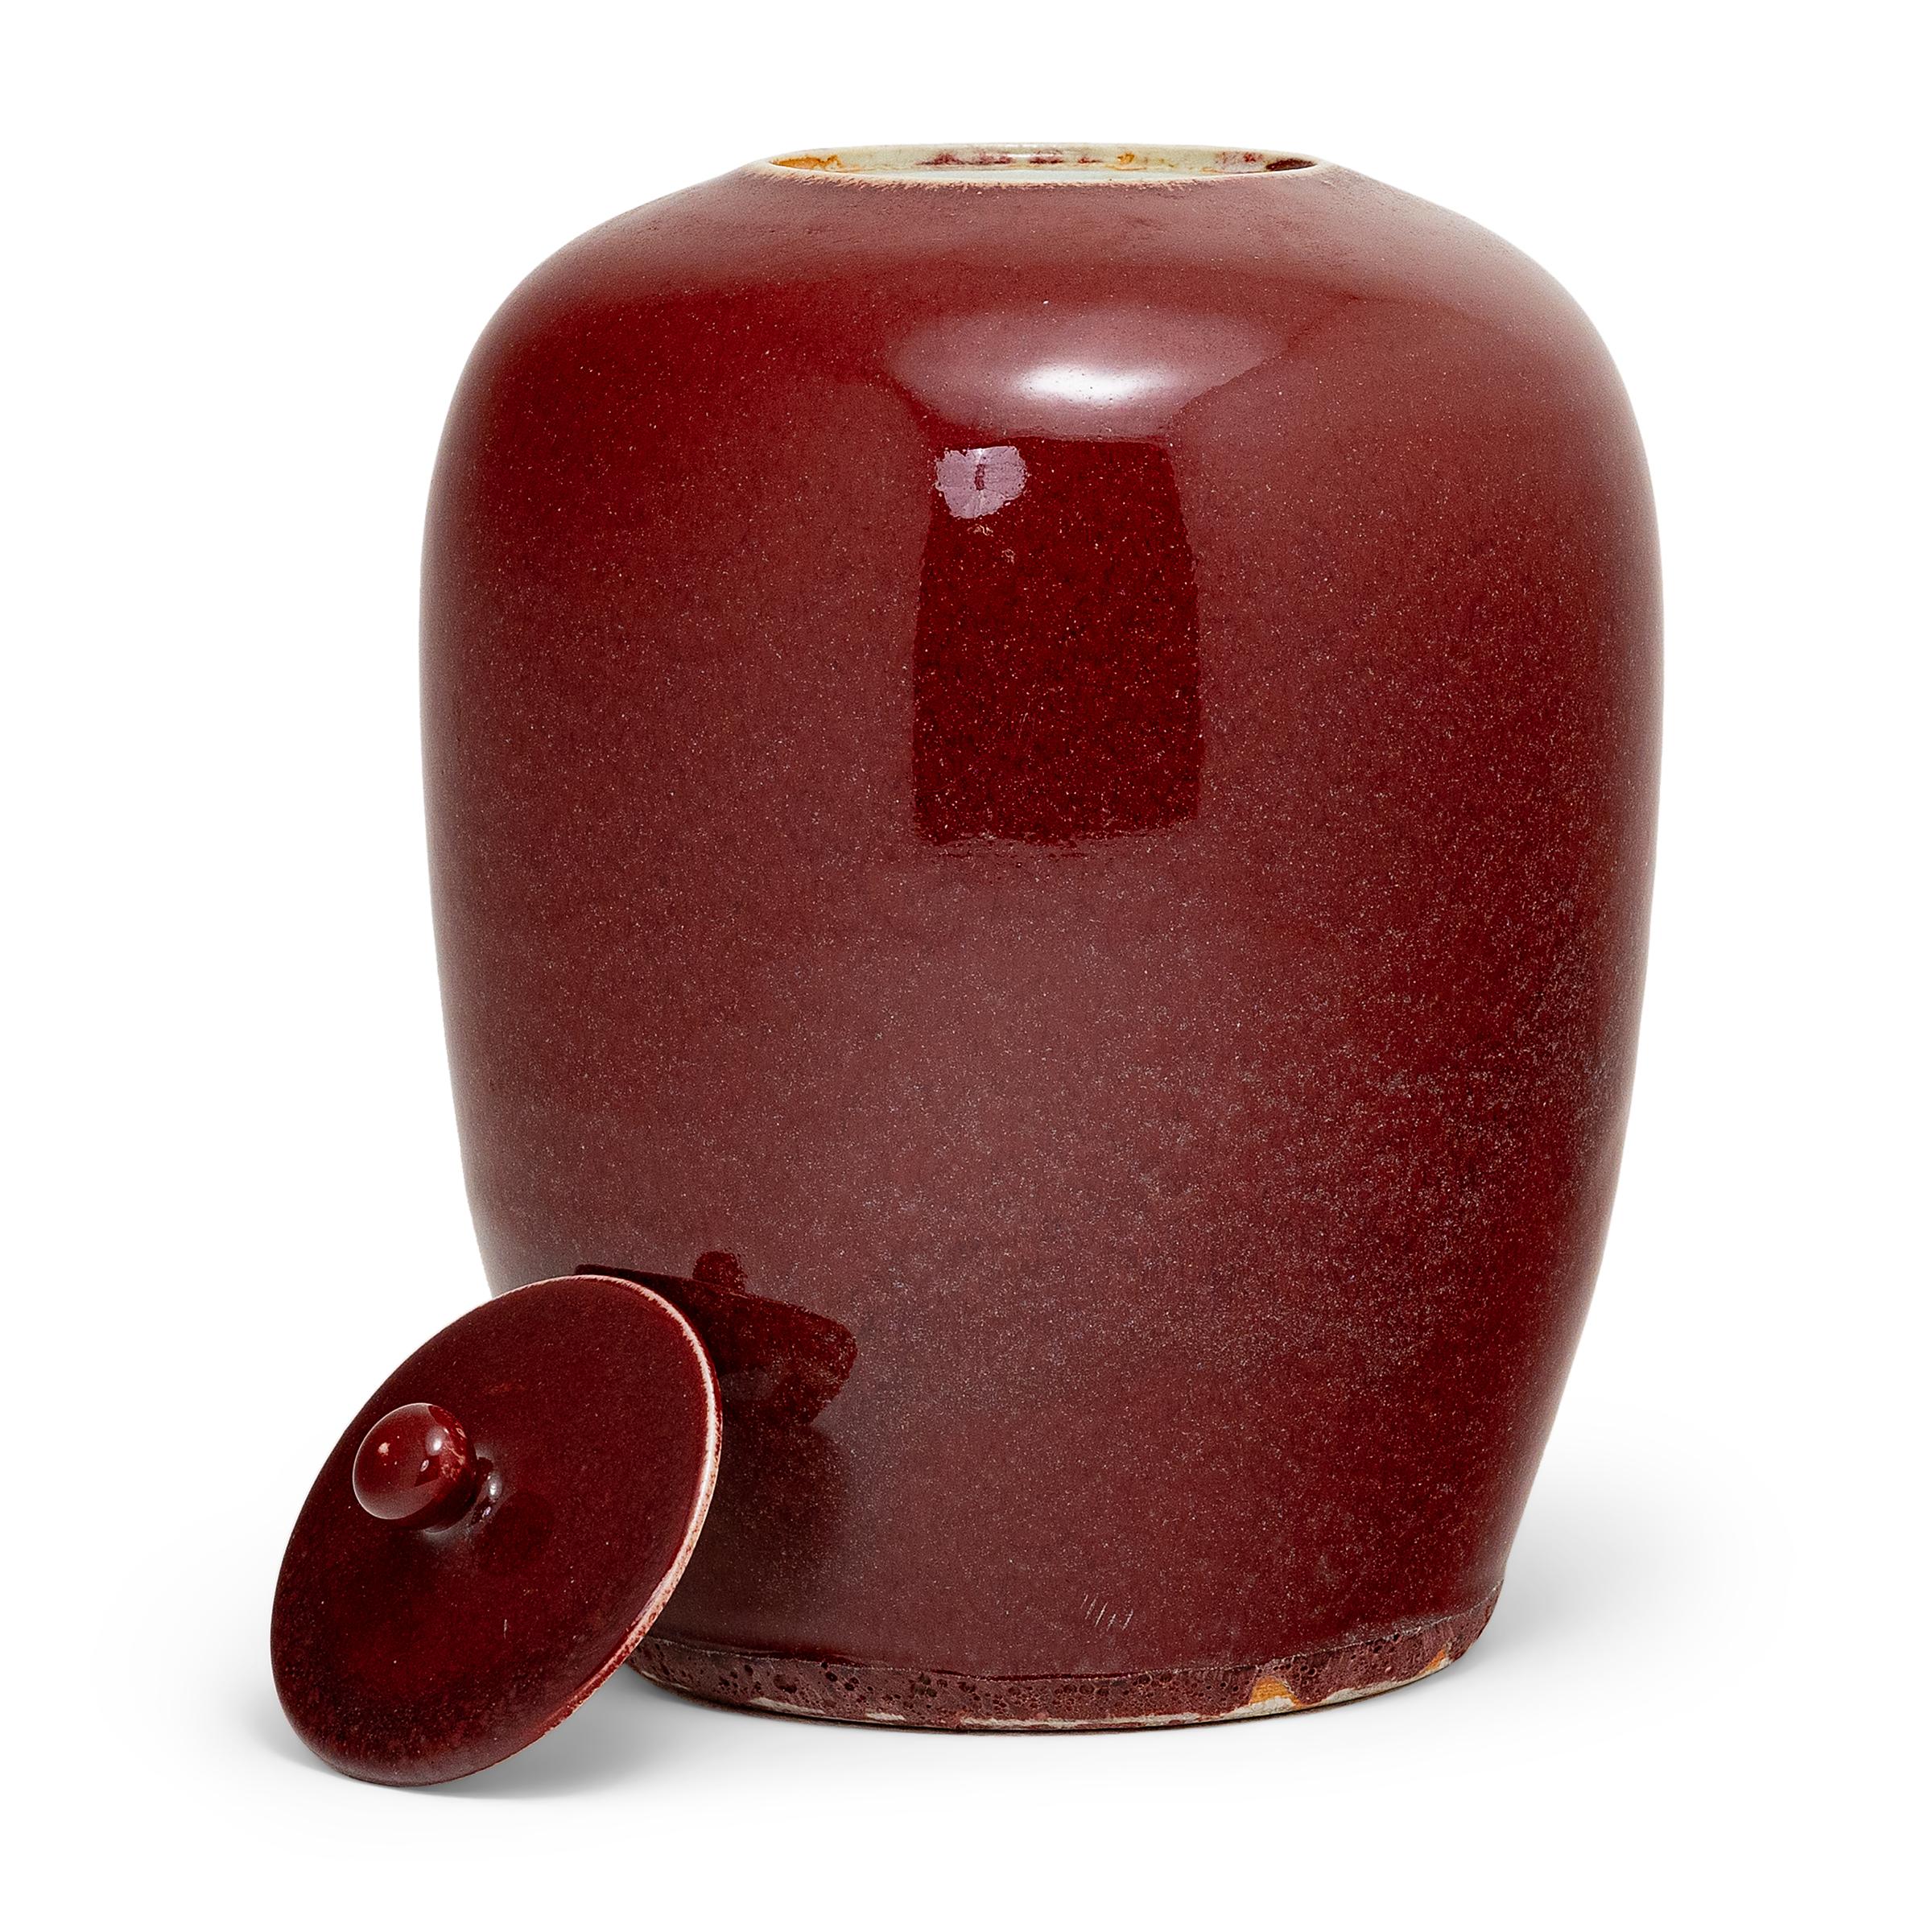 This tapered, ovoid ginger jar harkens back to the Song Dynasty (960 to 1279 AD) when artisans perfected the art of monochrome glazes. The vase's deep, rich red glaze is often called 